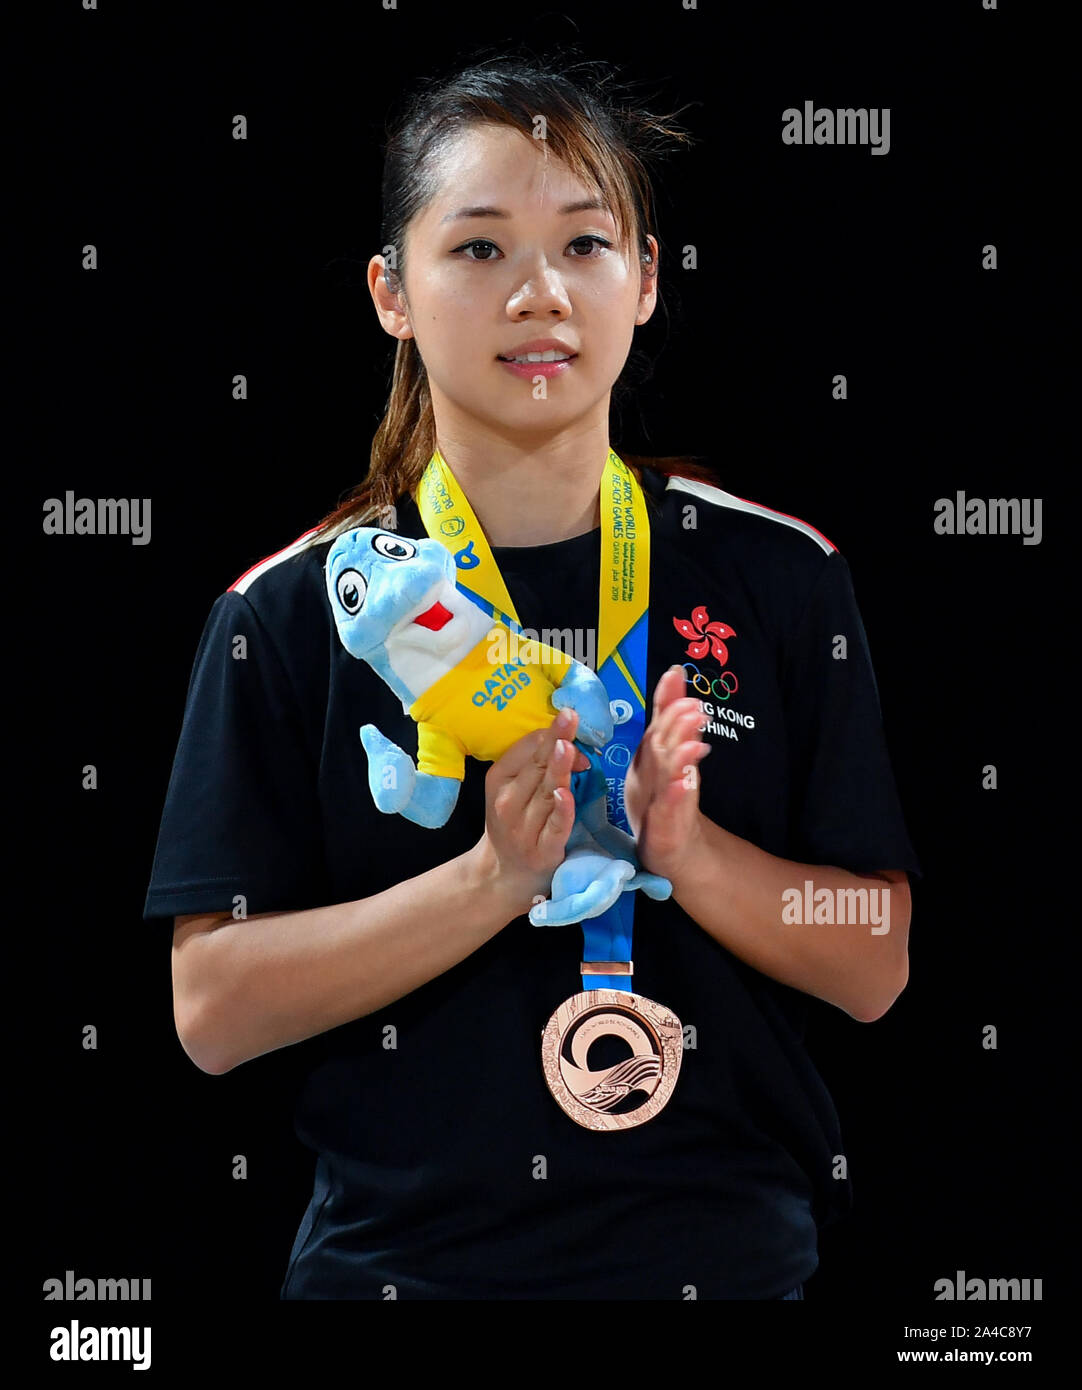 Doha, Qatar. 13th Oct, 2019. Lau Mo of China's Hong Kong pose for photos during the medal ceremony of the women's individual Kata event at the ANOC World Beach Games in Doha, Qatar, Oct. 13, 2019. Credit: Nikku/Xinhua/Alamy Live News Stock Photo